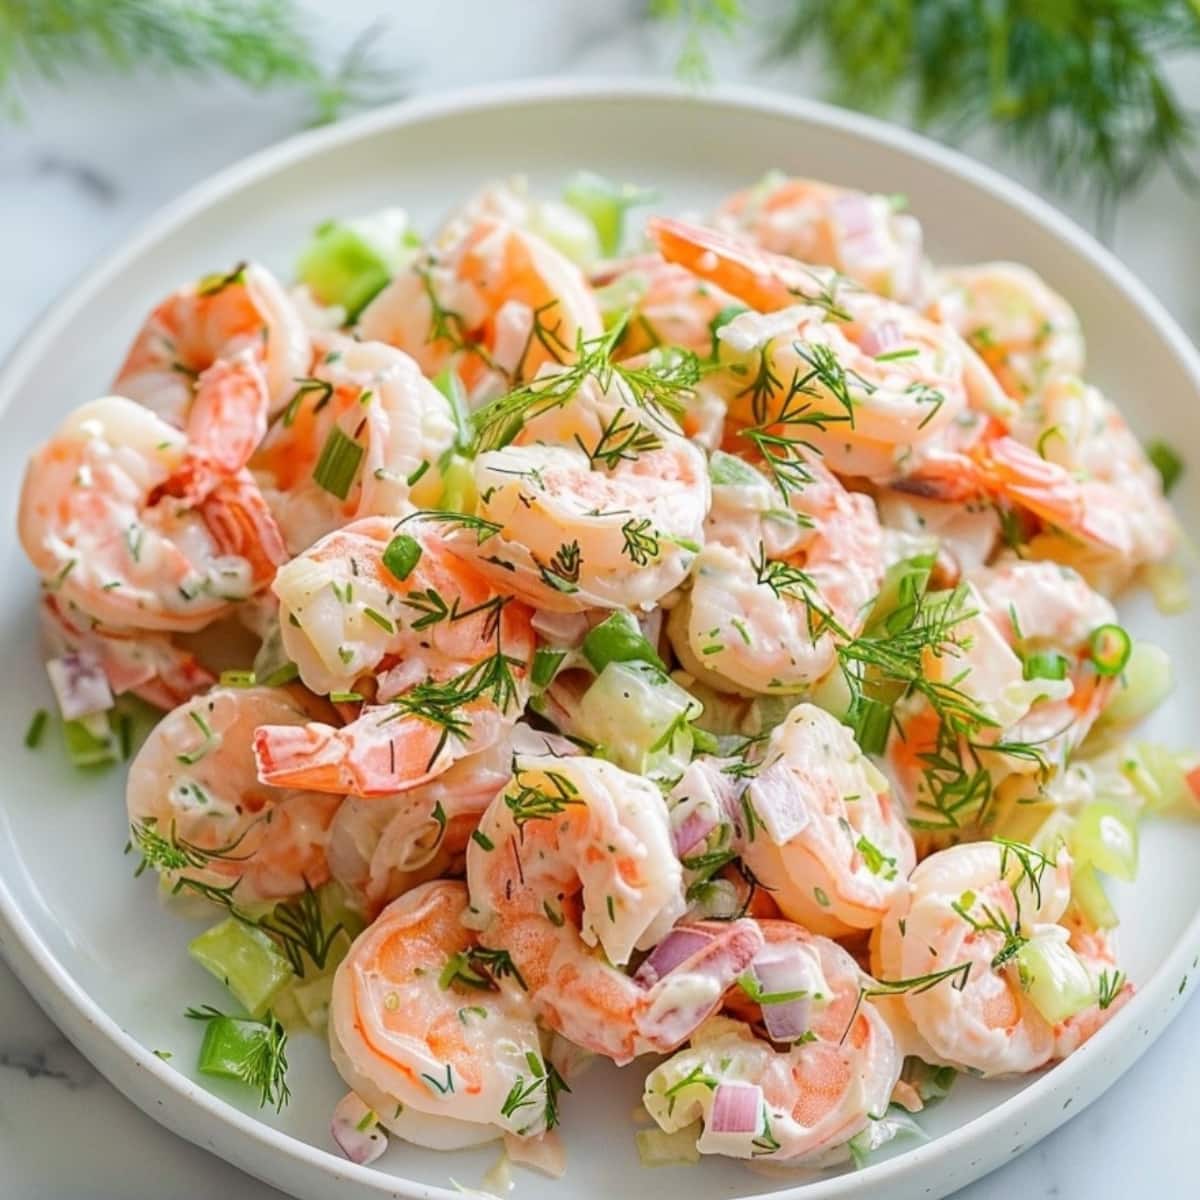 Creamy shrimp salad with mayonnaise dressing, dill, chopped celery and onion.